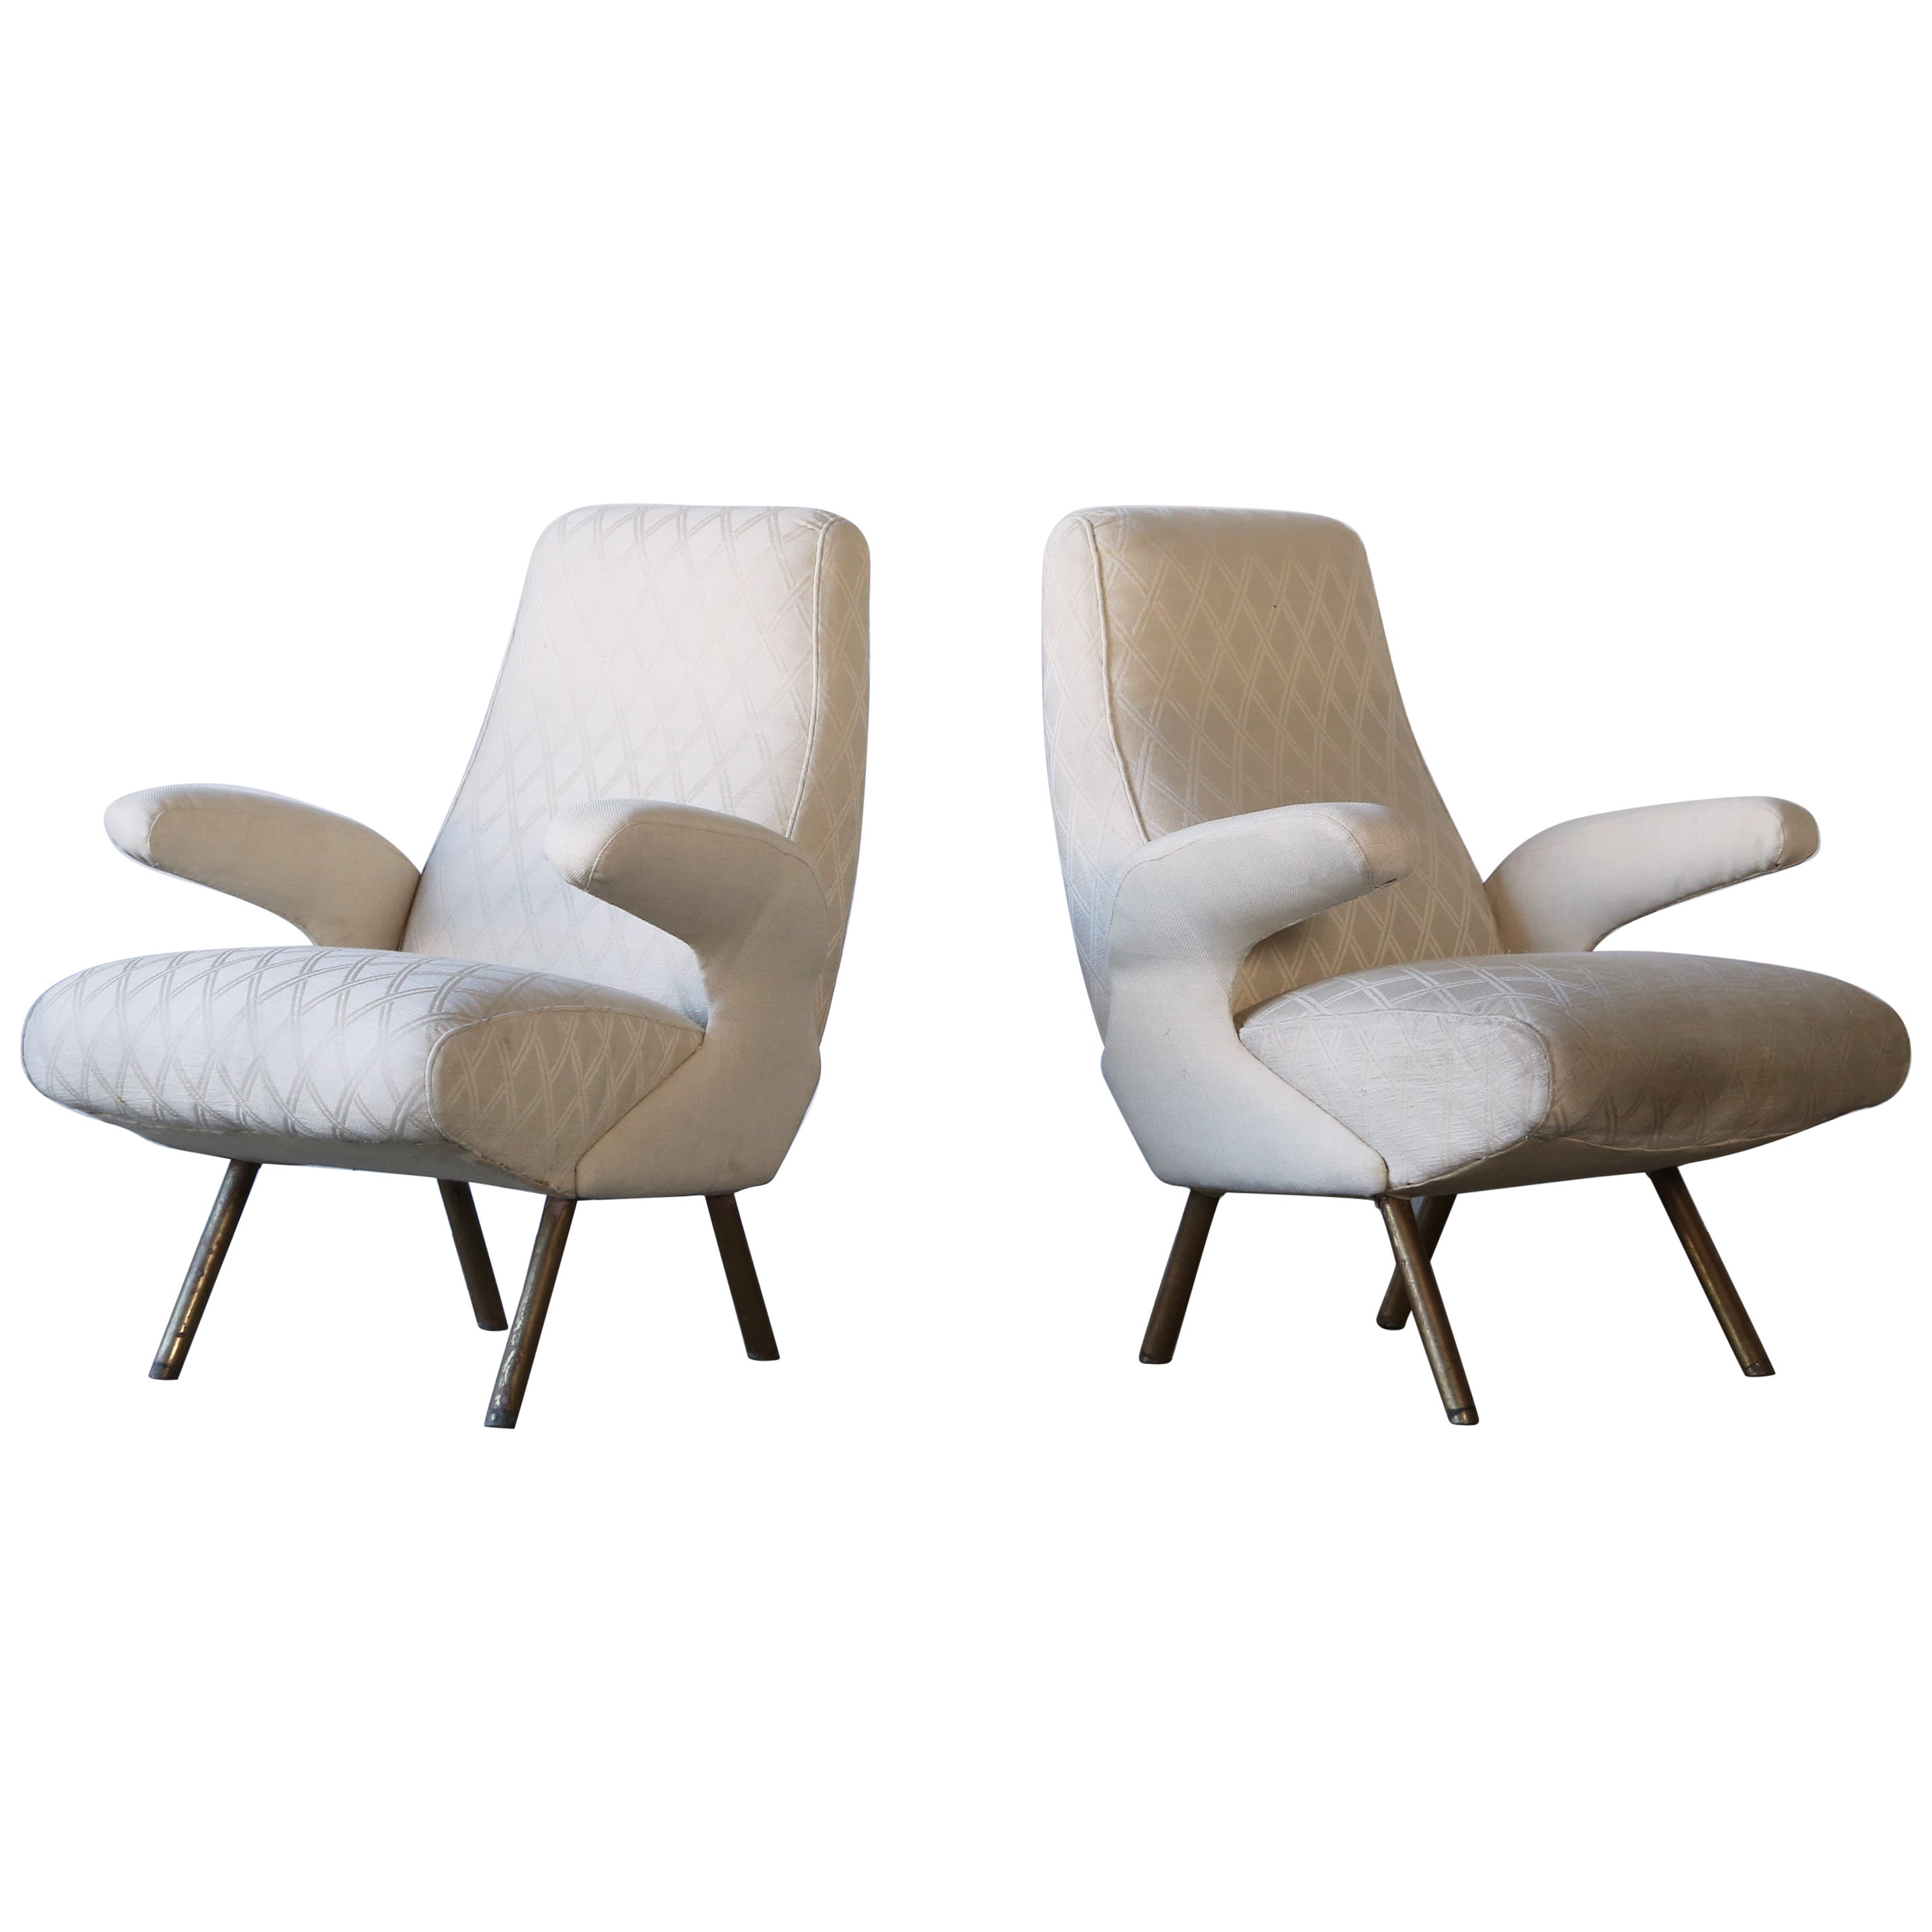 Nino Zoncada Attributed Lounge Chairs, Italy, 1950s, for Reupholstery For Sale